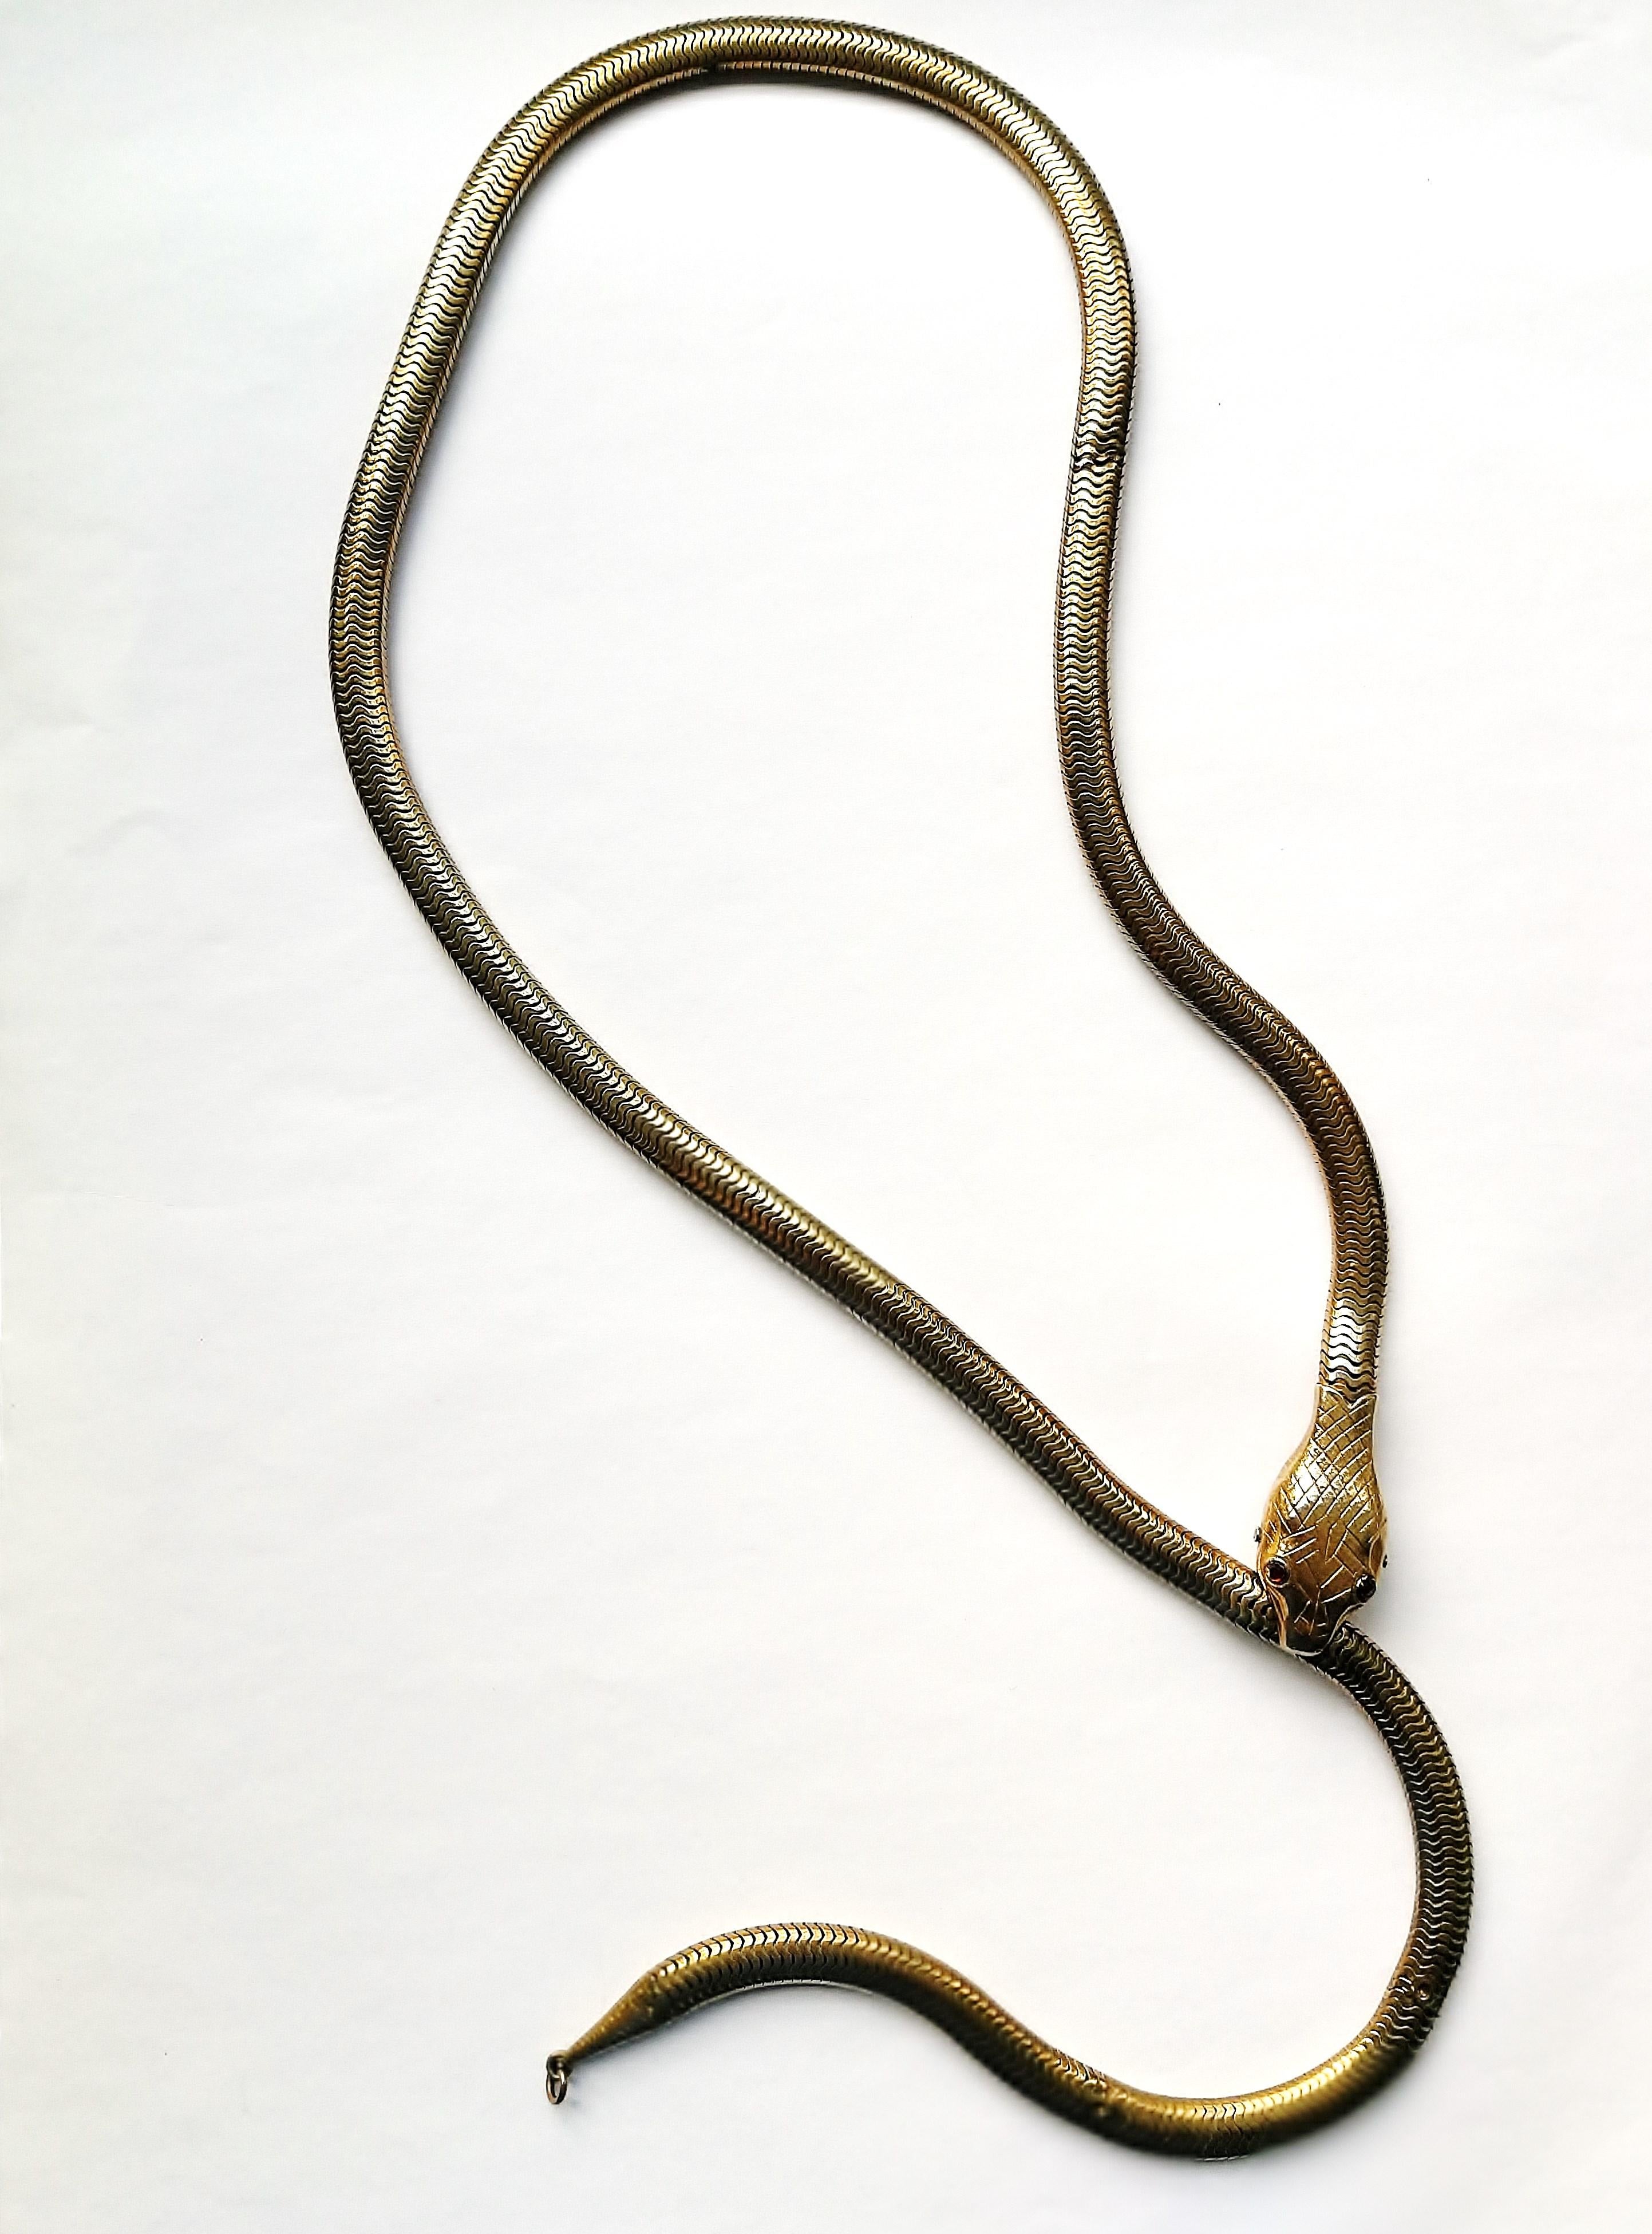 Of beautiful quality and wonderfully sinuous, glistening and gleaming, this 'snake' necklace is an elegant piece.
It can also be worn as a belt, having a variable length fitting, where the snake's mouth acts as the fixture.It has a finely crafted